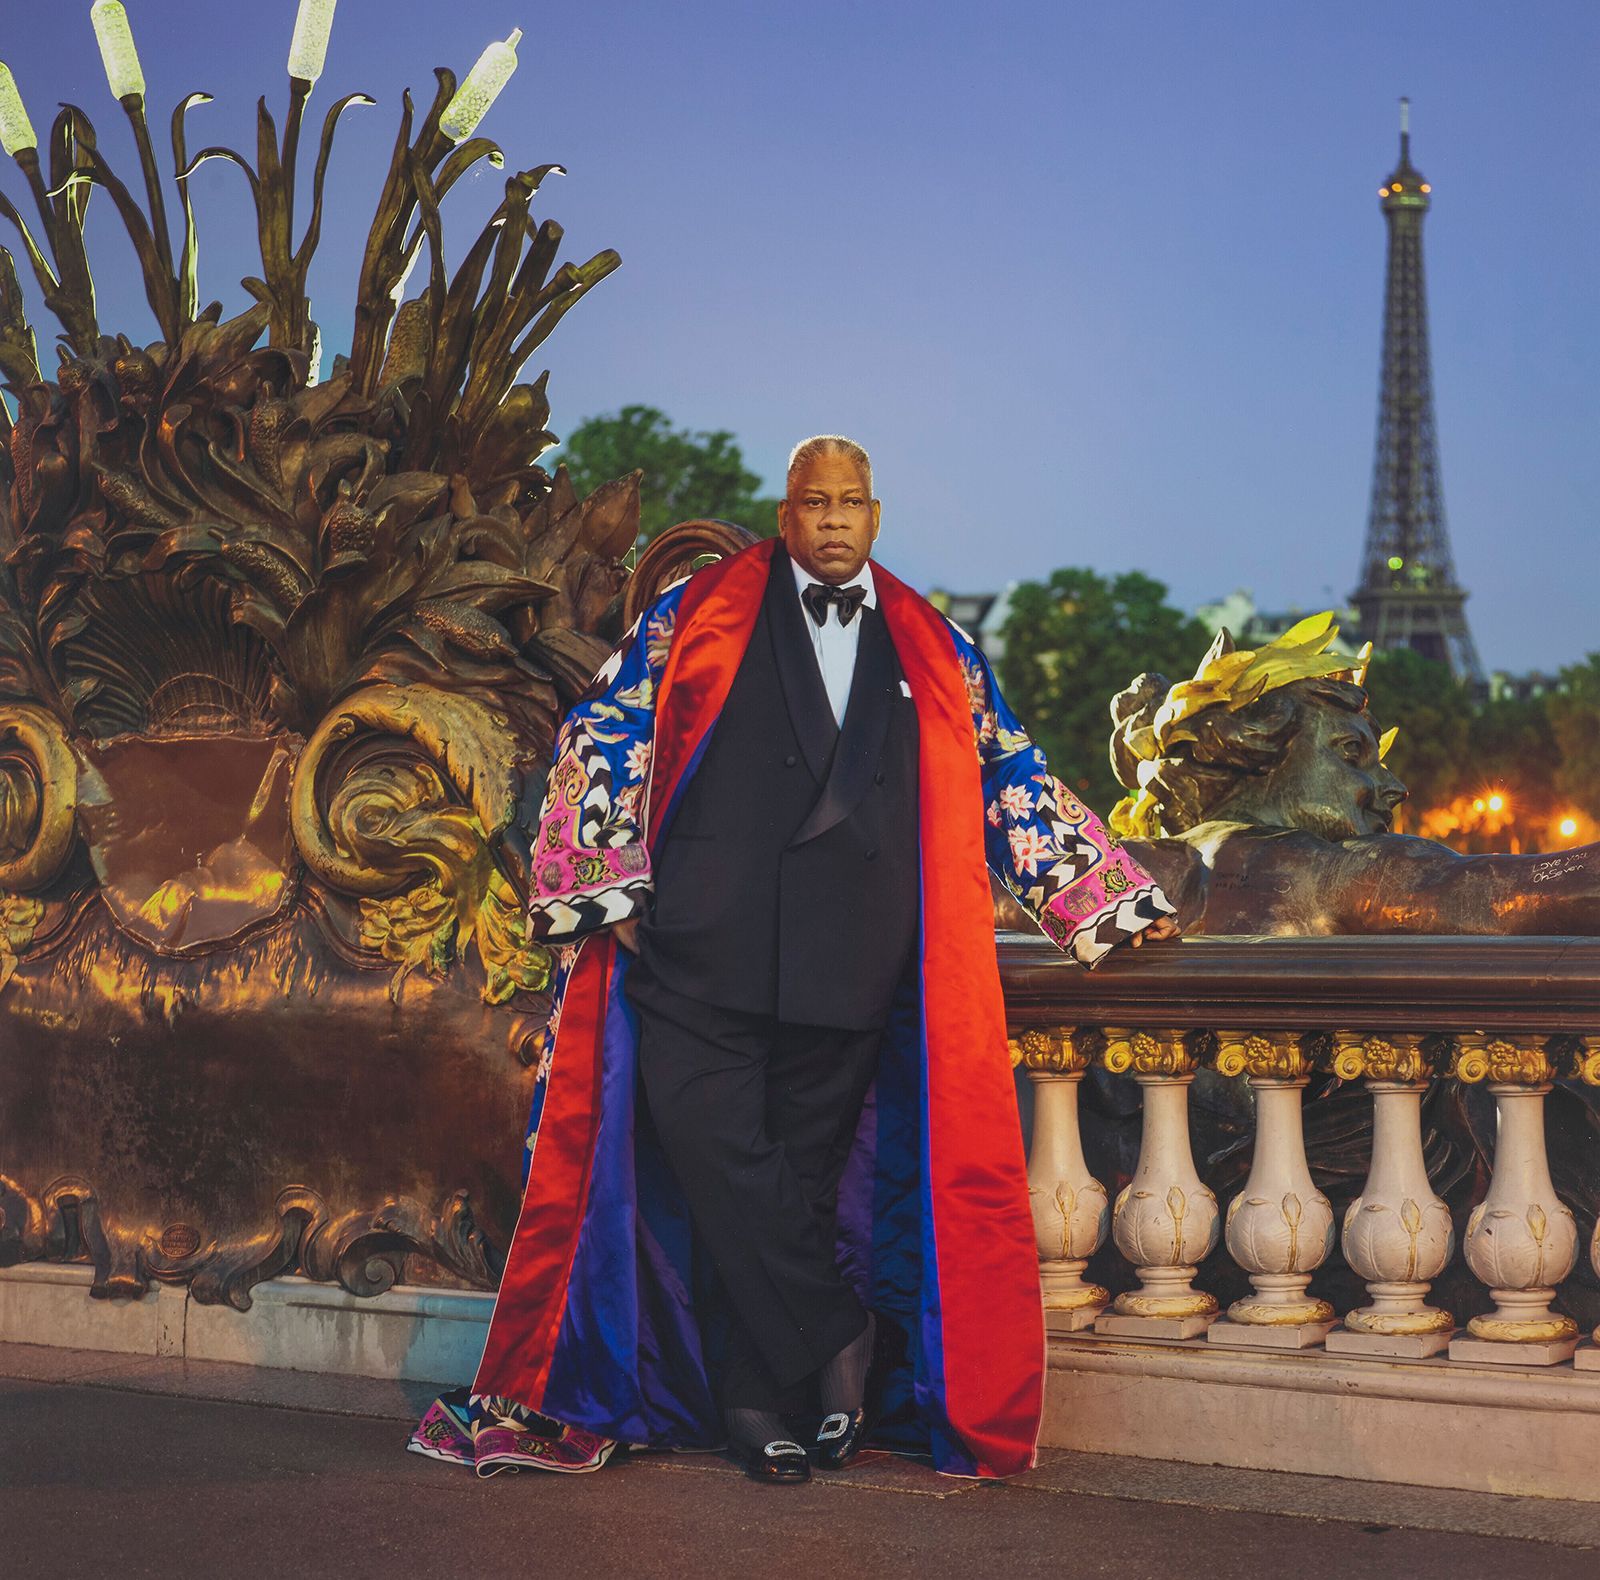 André Leon Talley auction fetches almost $3.6 million